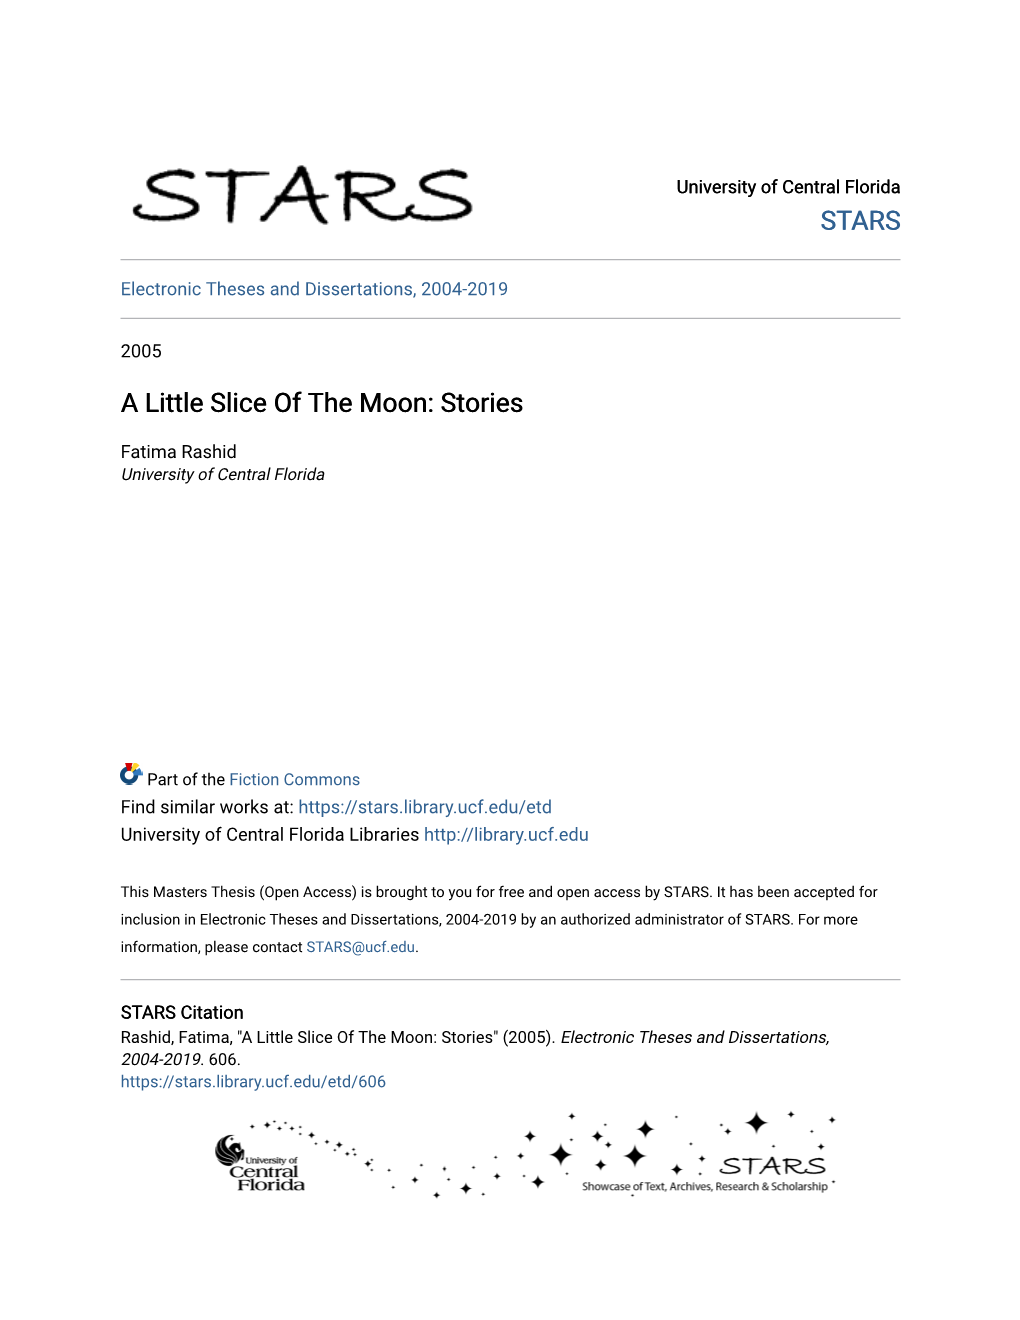 A Little Slice of the Moon: Stories